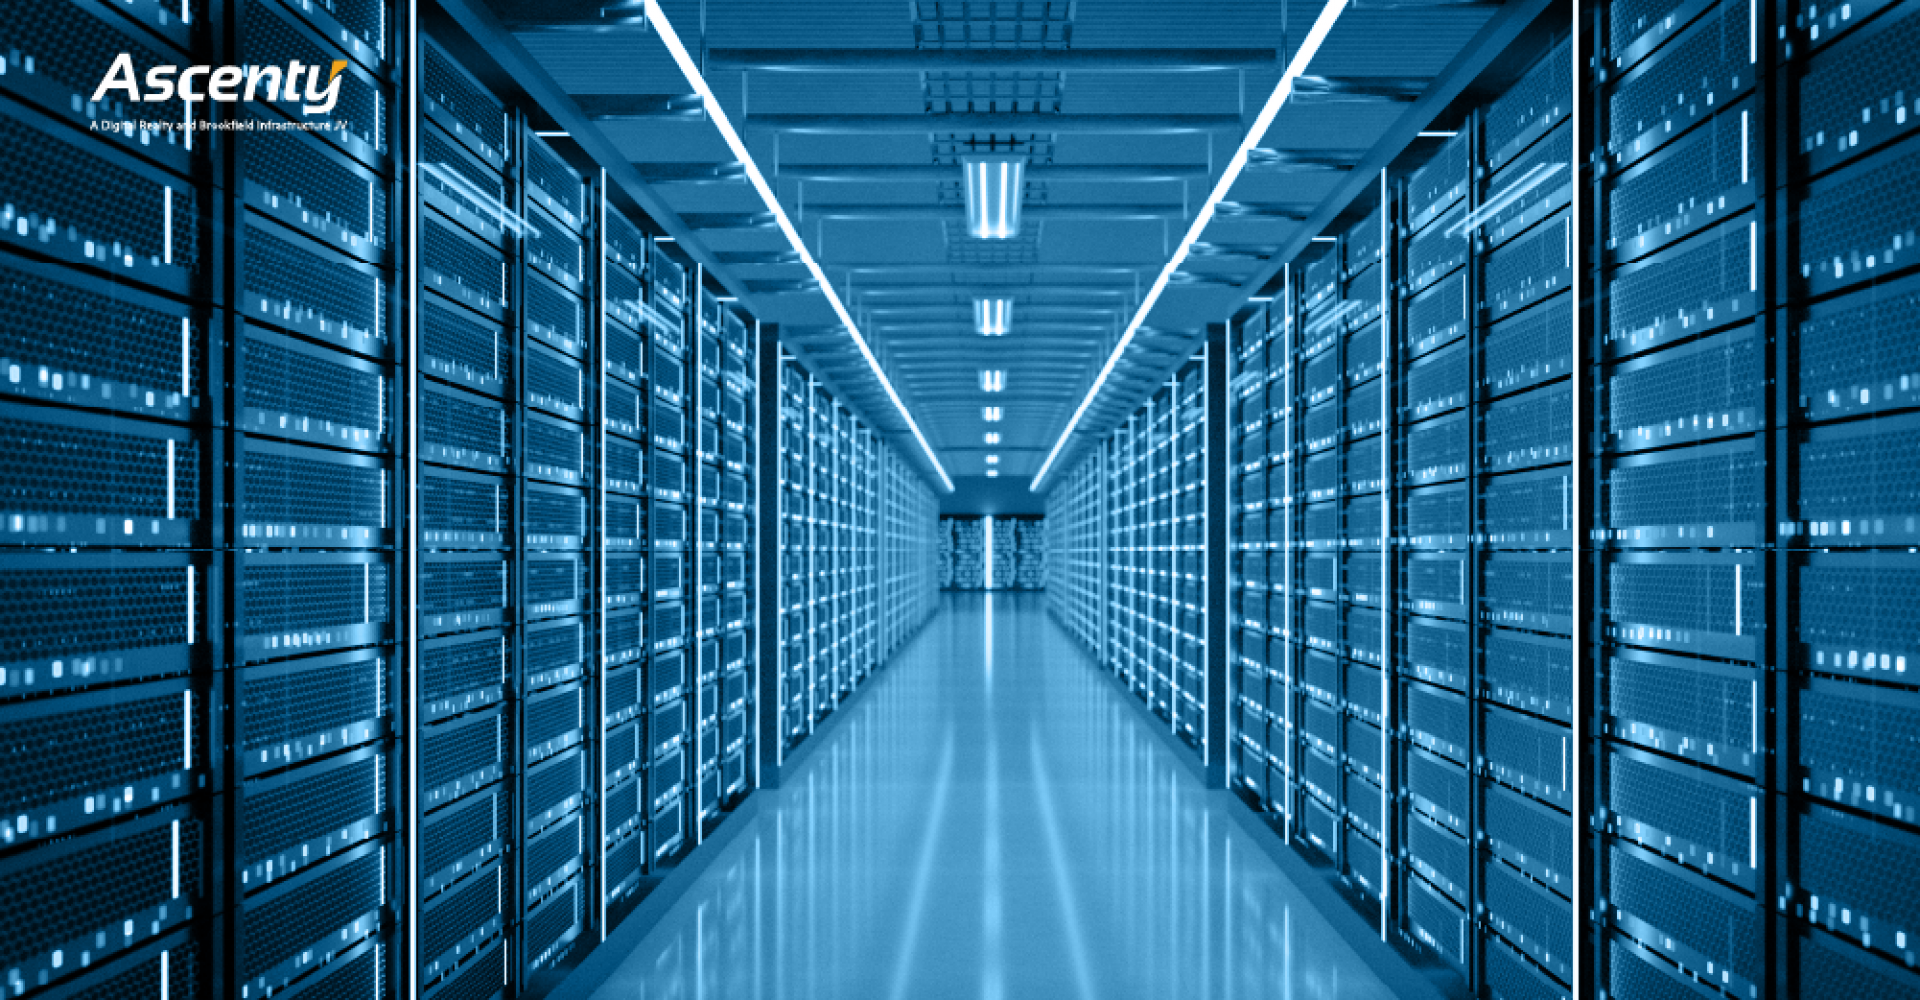 Learn about the different types of Data Centers and their main characteristics